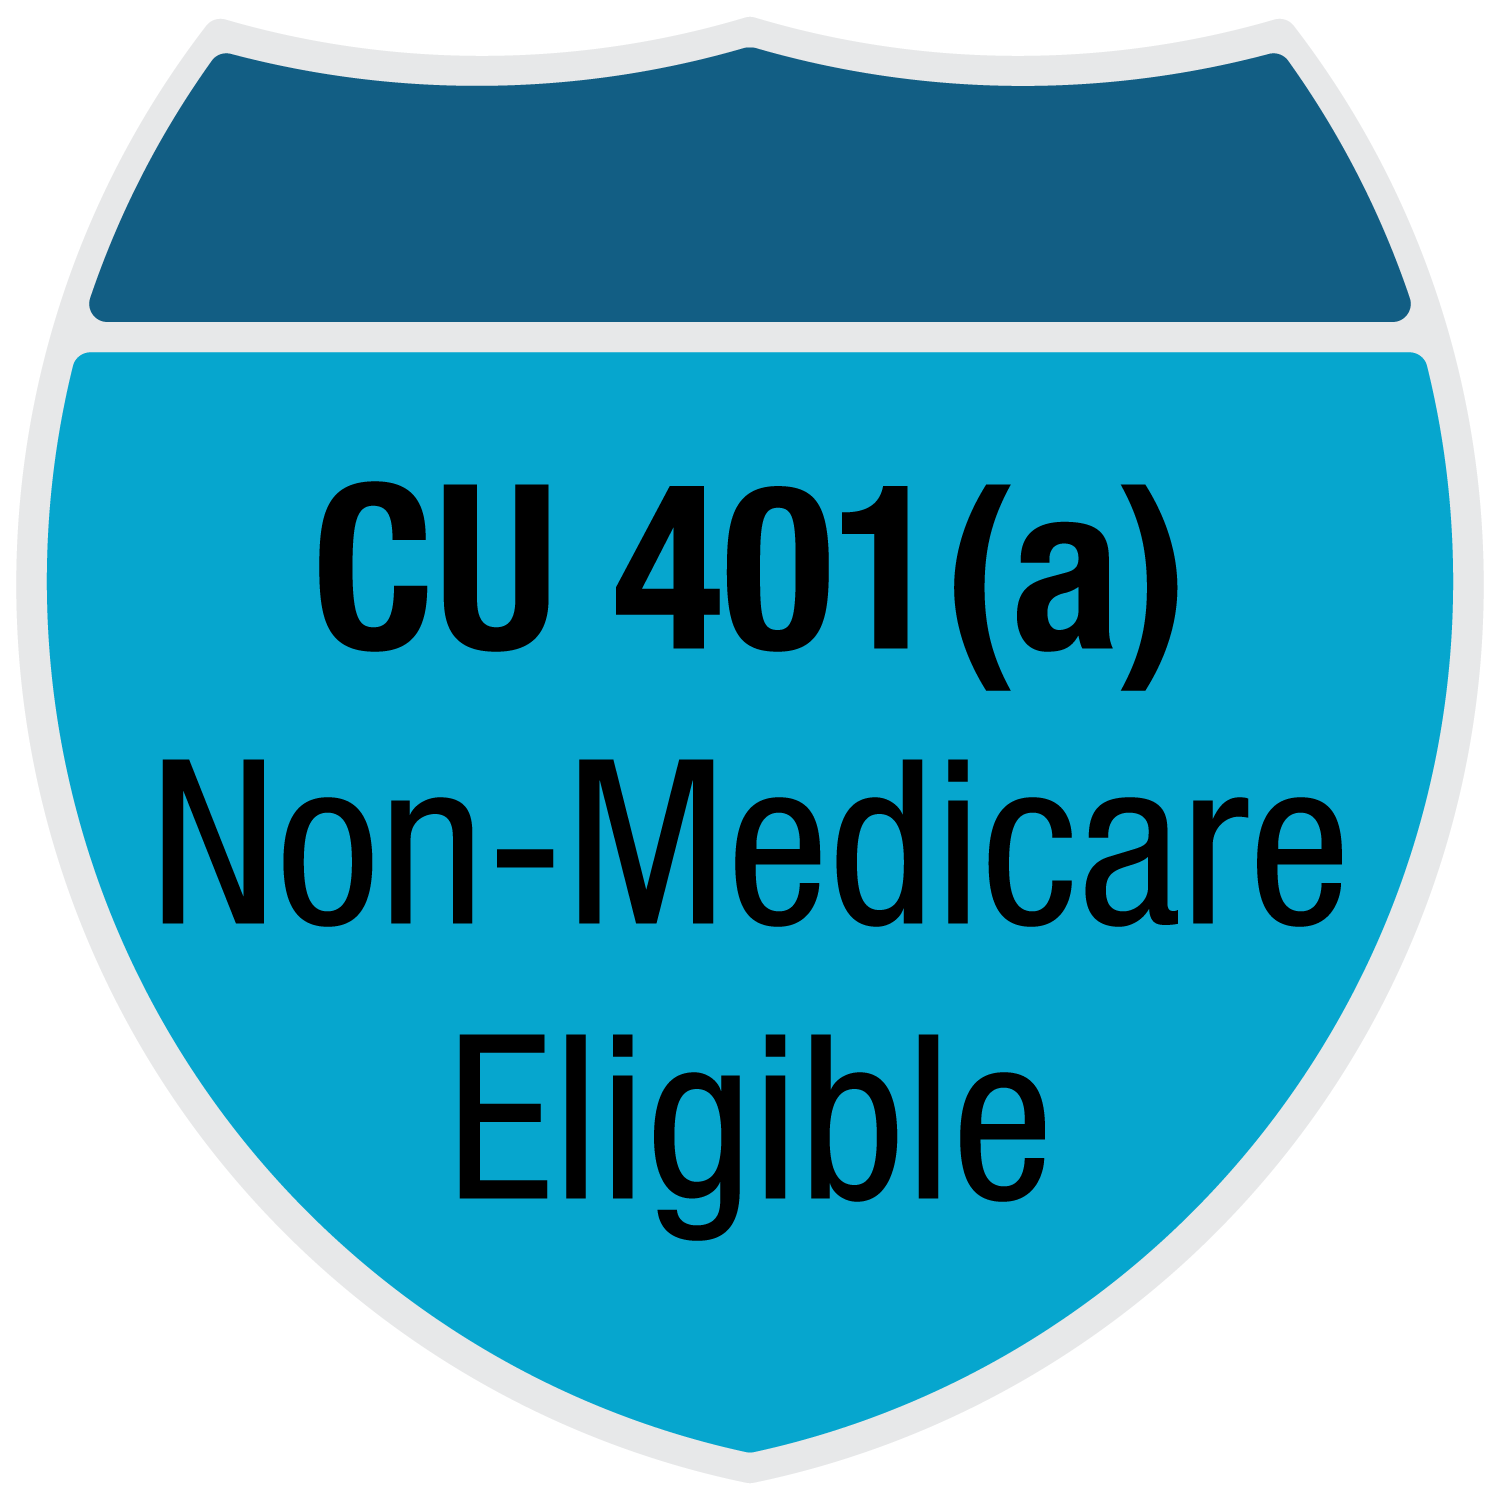 Click here if you are a 401(a) retiree who is not medicare eligible